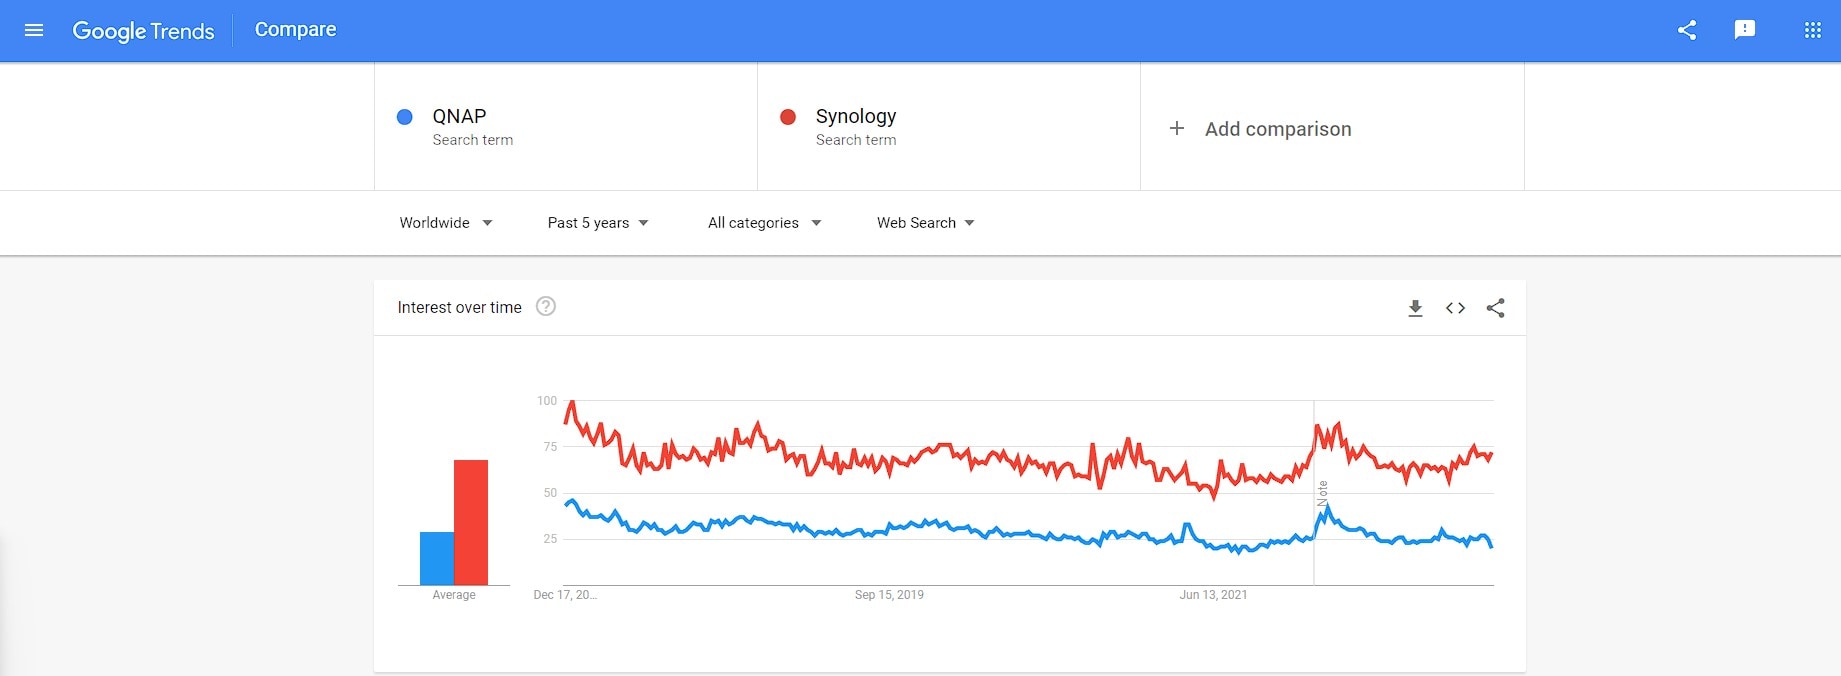 search trends qnap and synology